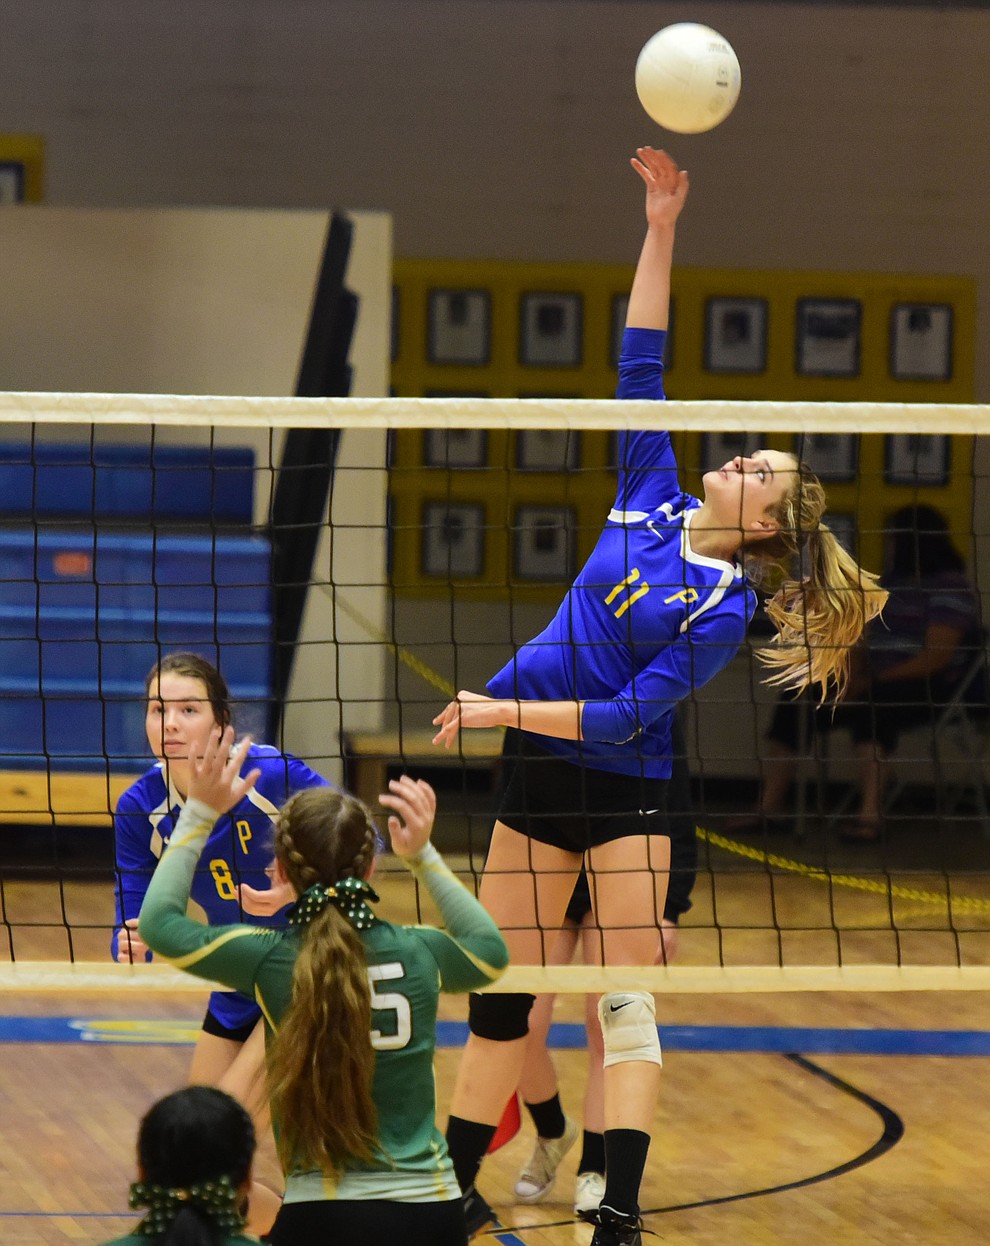 Prescott's Savanna James (11) goes for a kill as they play Mohave in volleyball Tuesday, September 12 in Prescott. (Les Stukenberg/Courier).